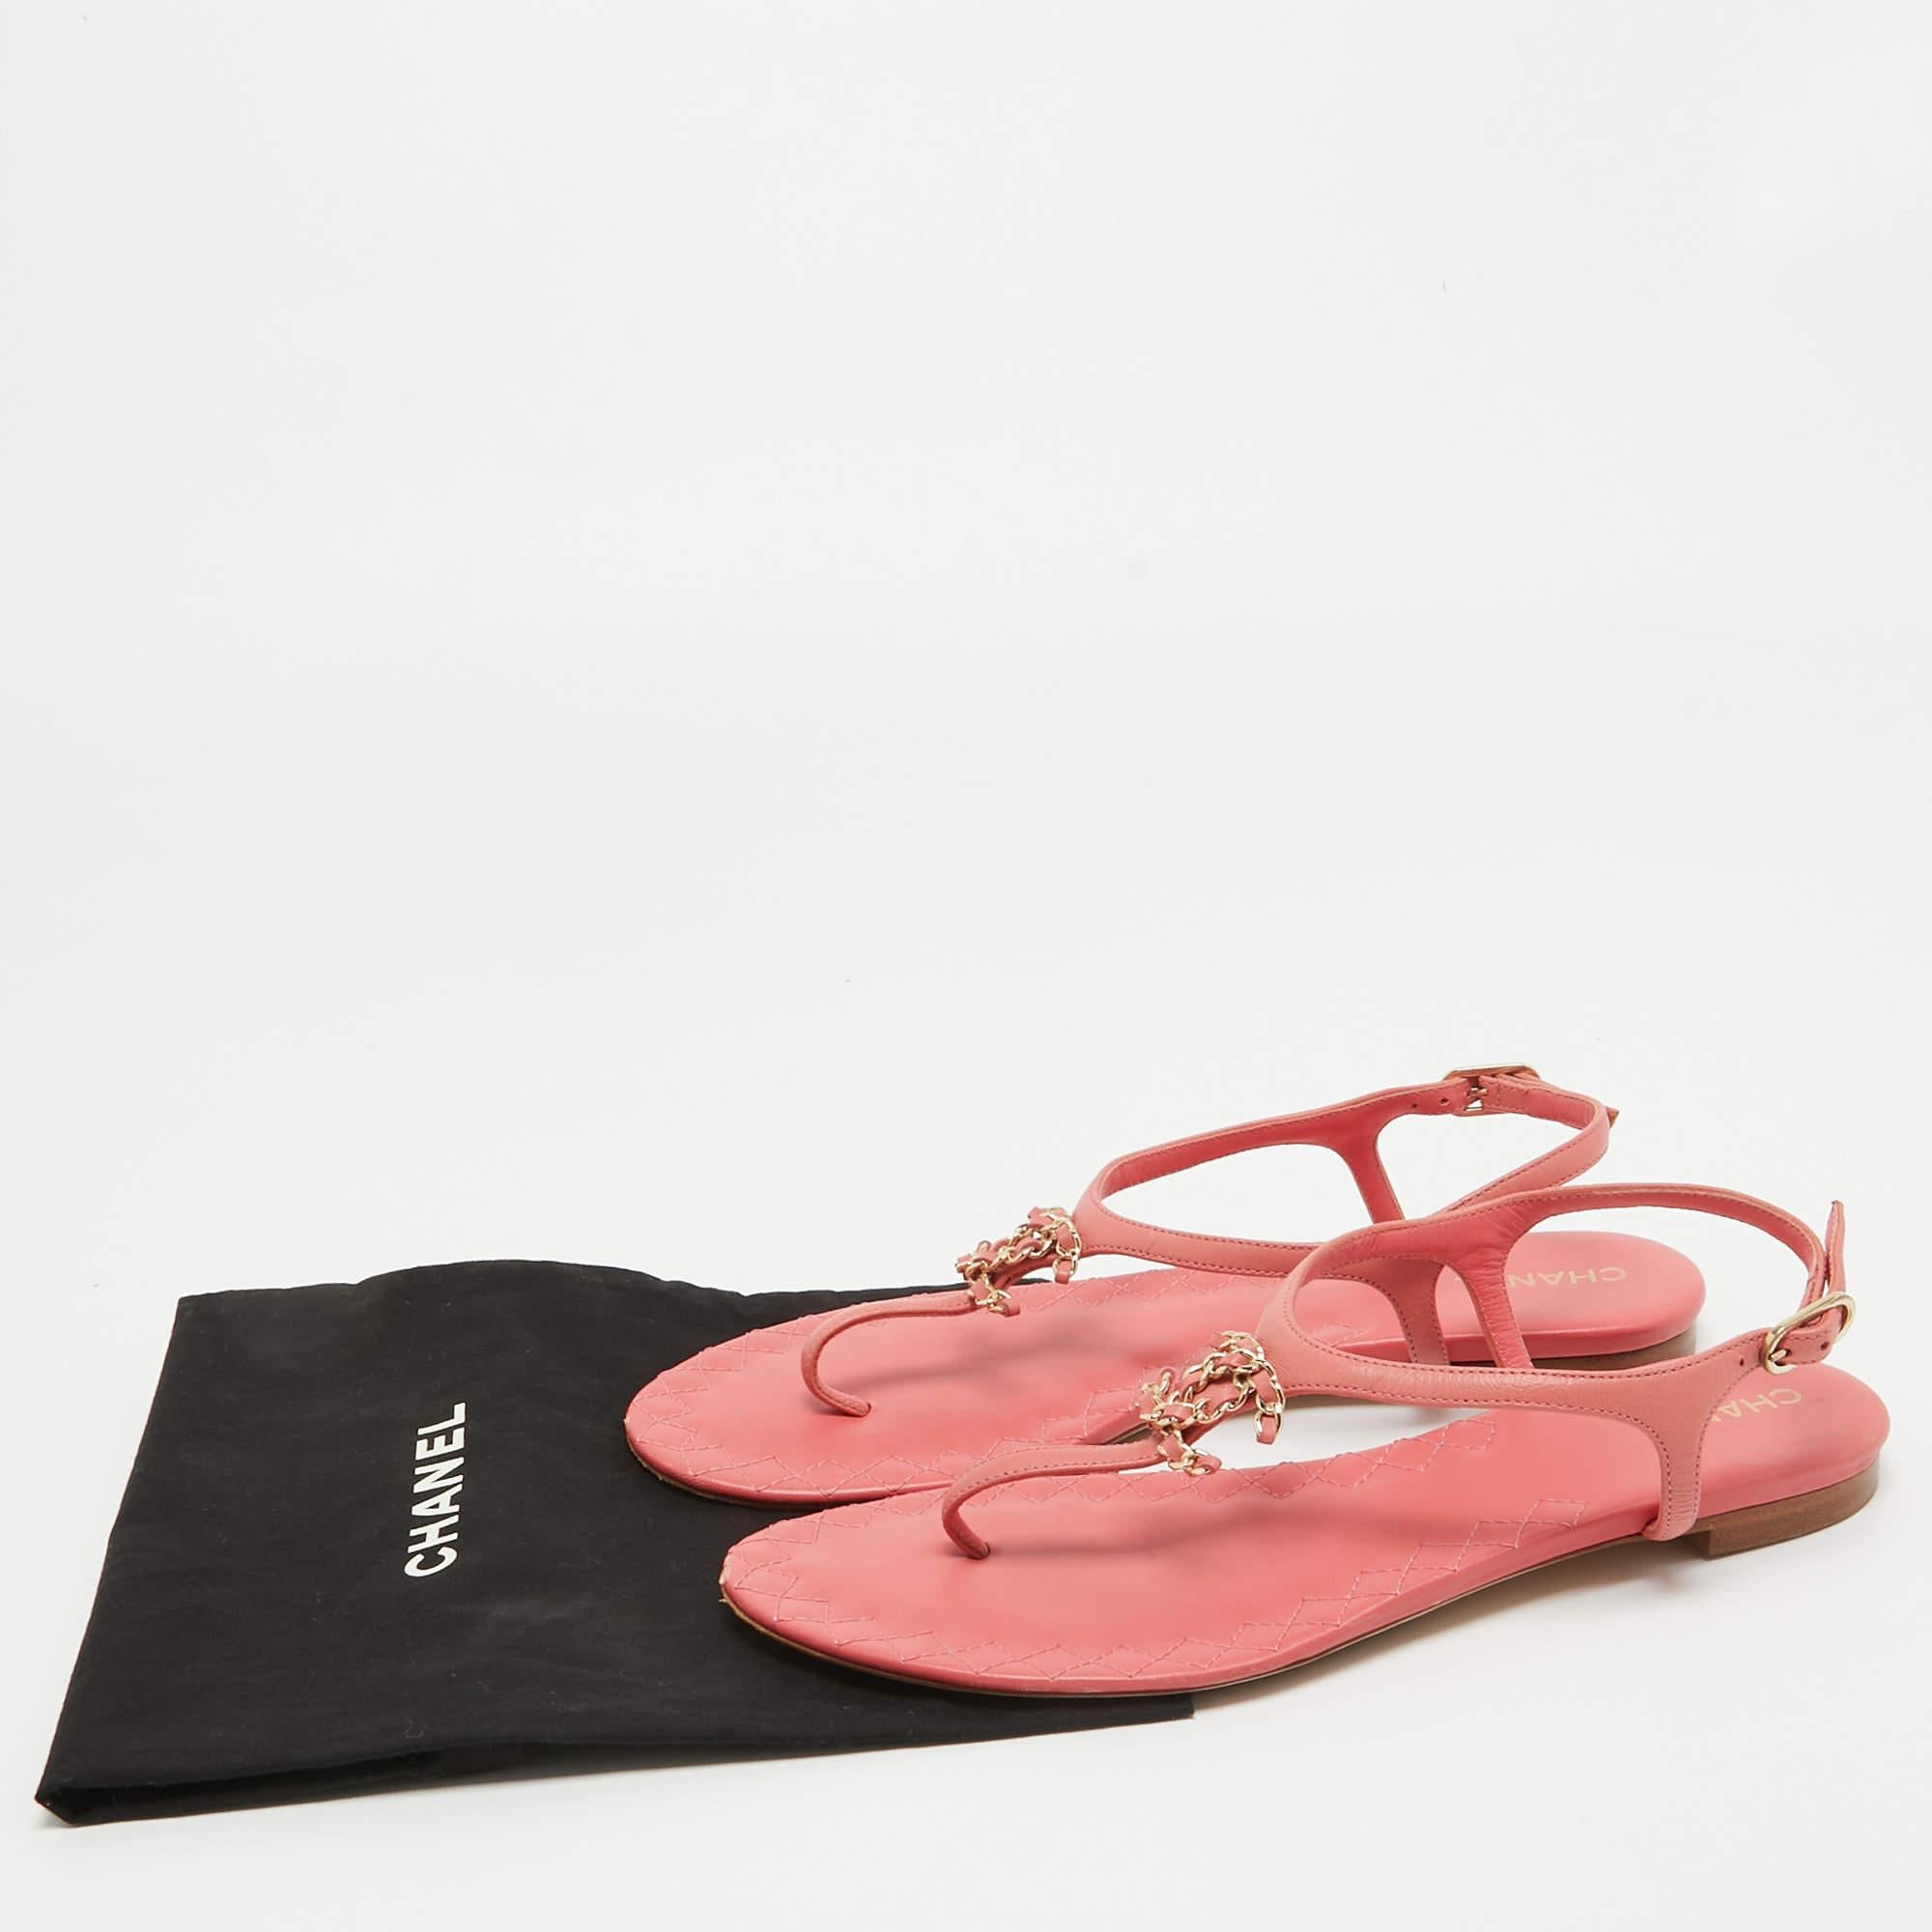 Chanel Pink Leather Chain-Link Thong Sandals Size 38 7